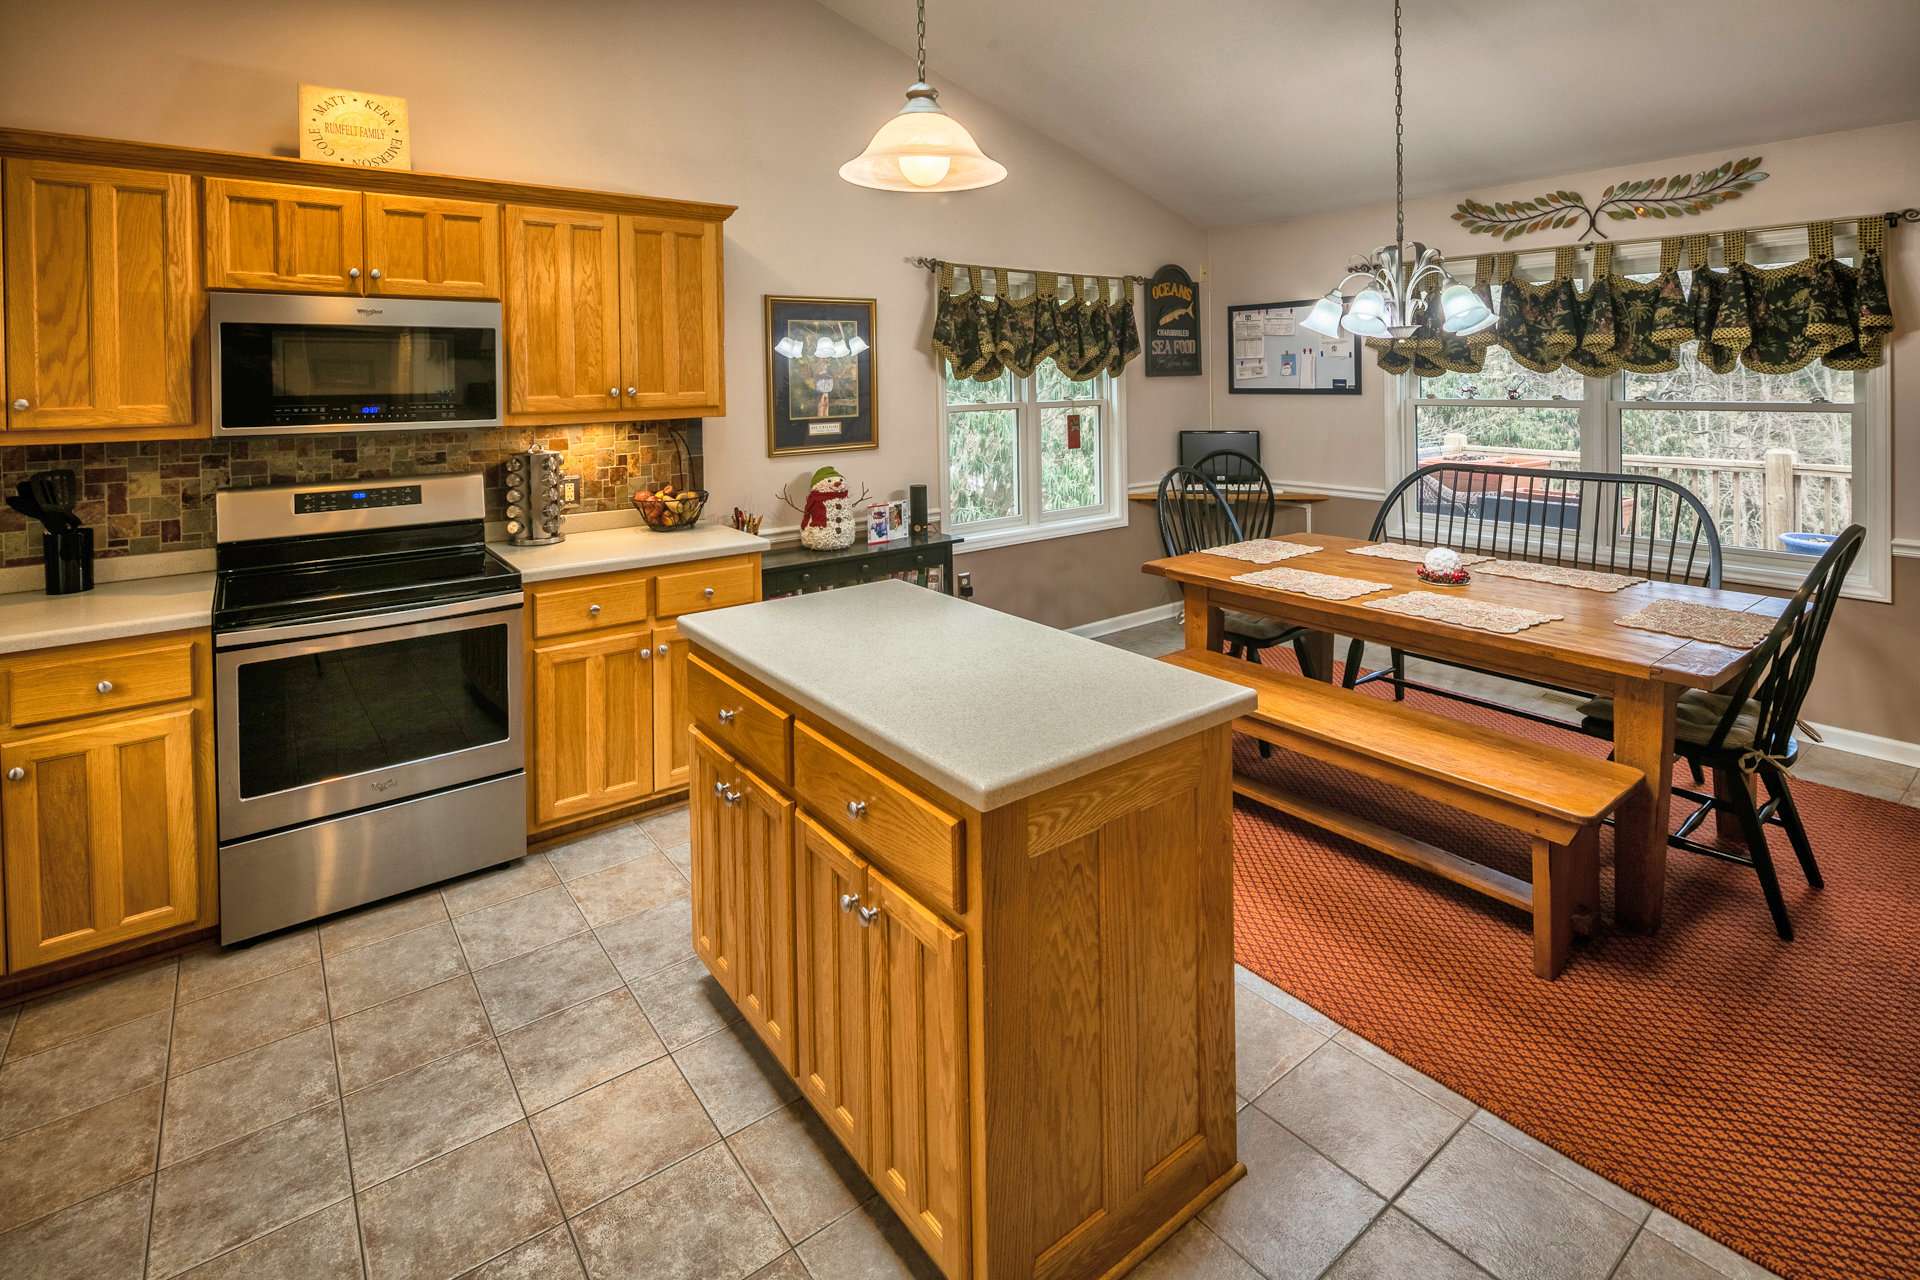 The dining area is open to the kitchen and living area and offers lots of windows to enjoy the outdoor scenery through all four seasons in the North Carolina Mountains.